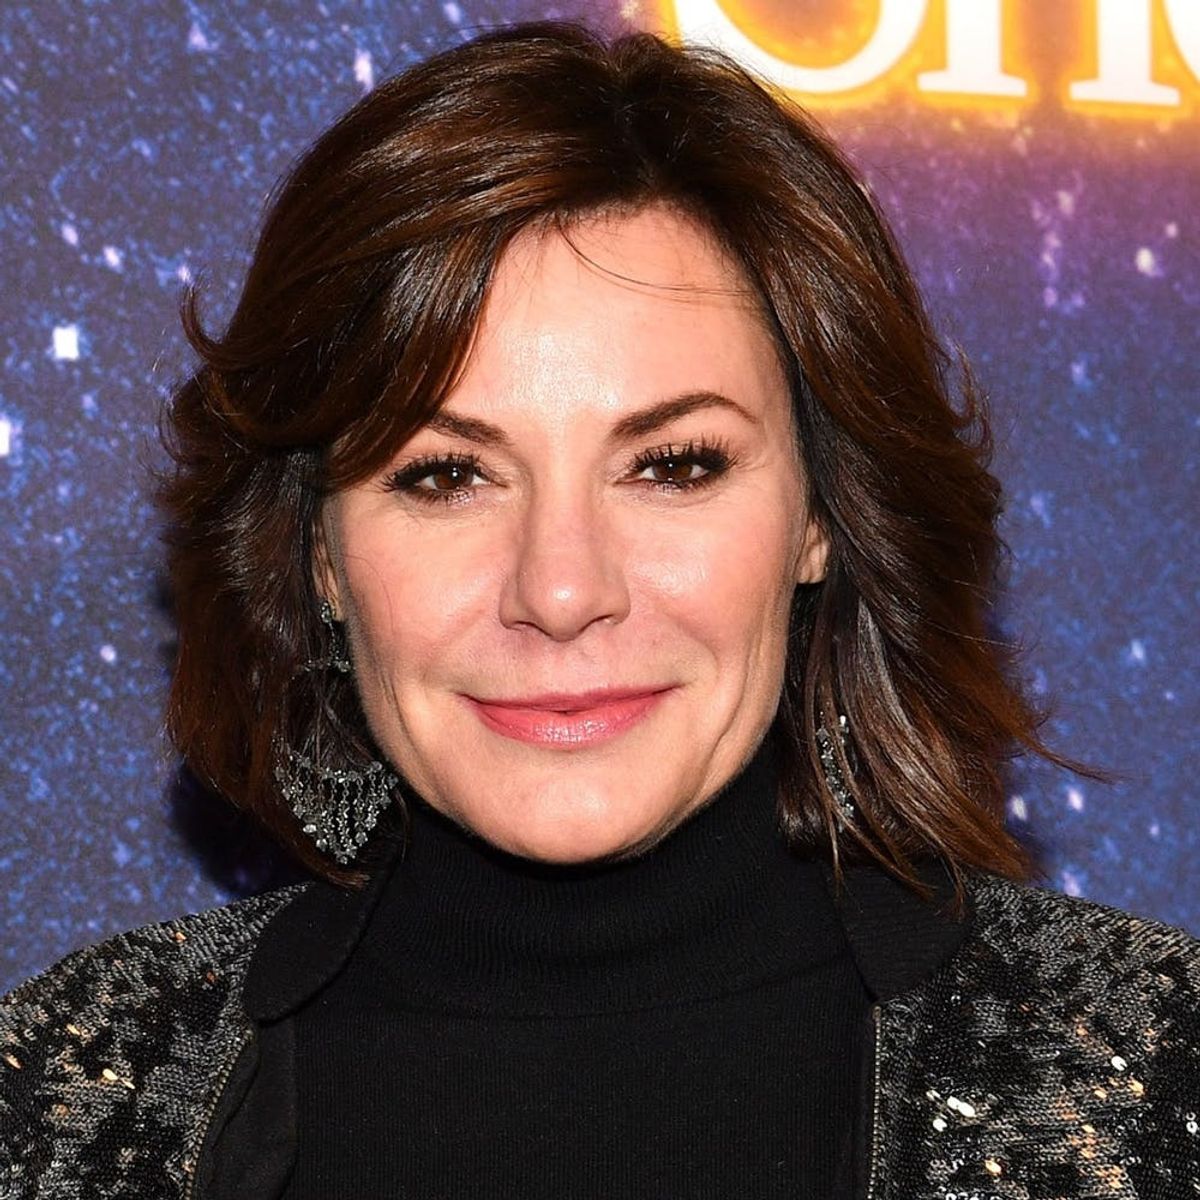 “Real Housewives of New York” Star Luann de Lesseps Checks into Rehab After Arrest